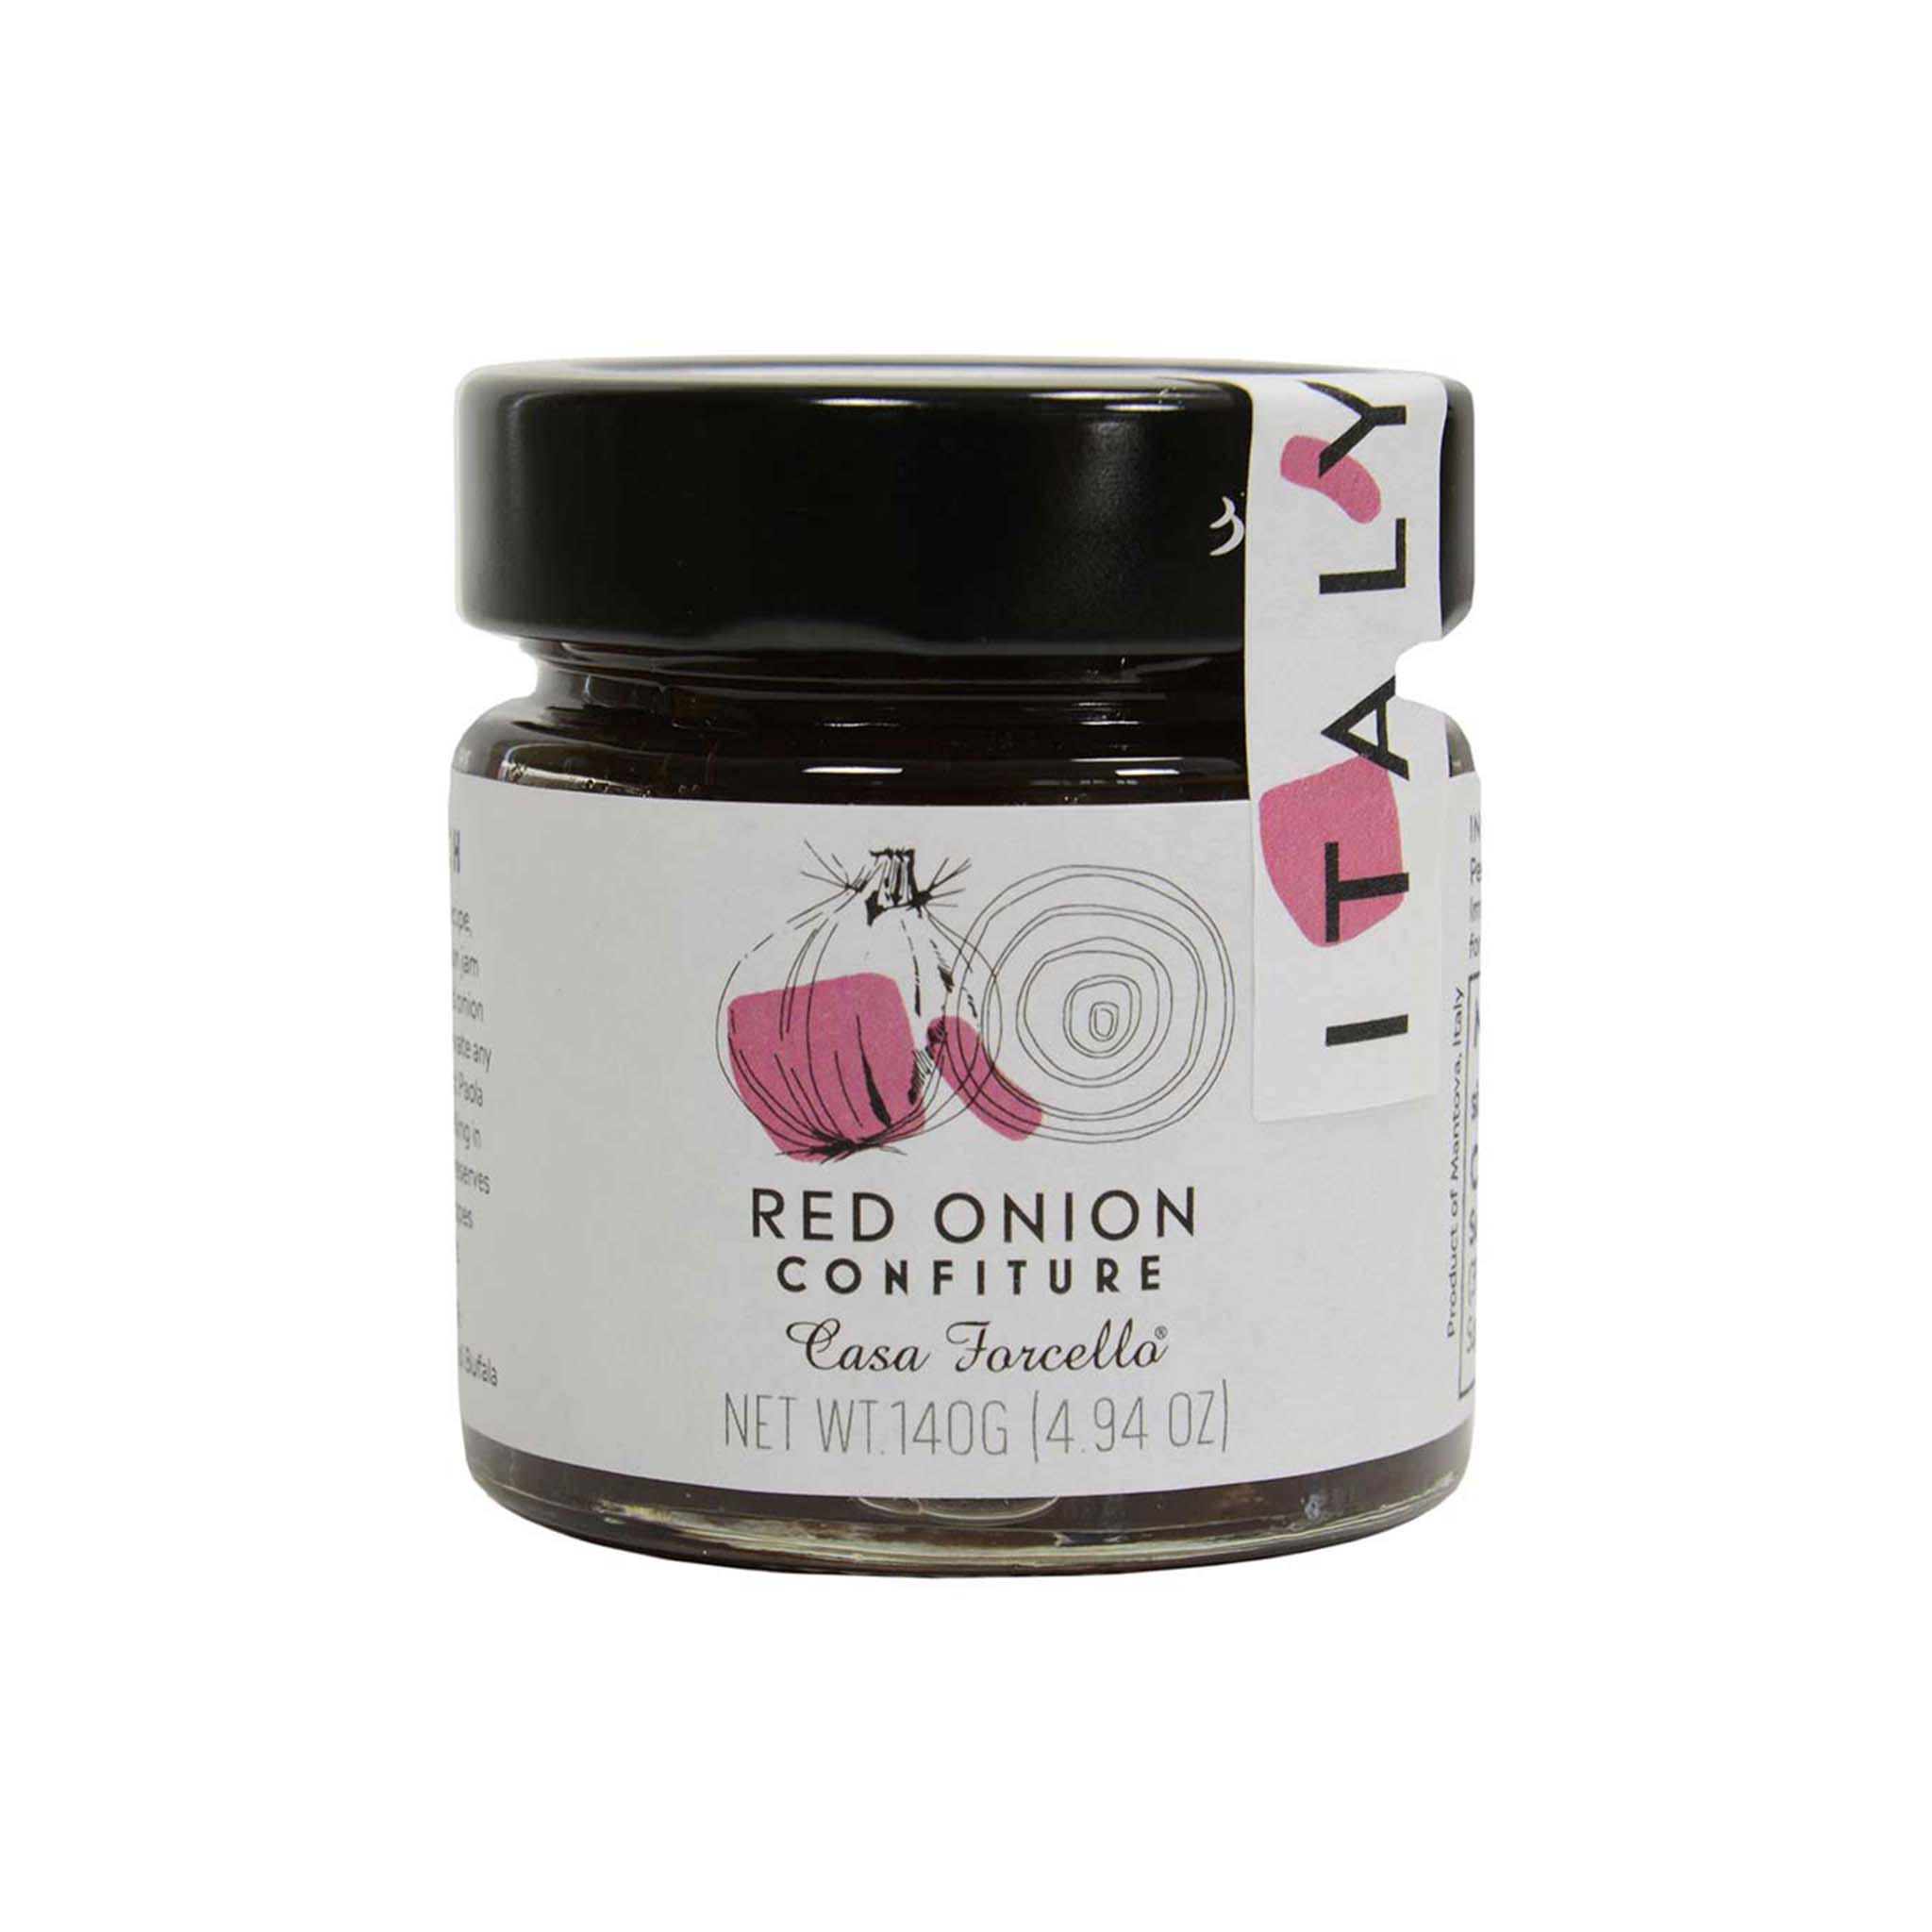 CASA FORCELLO RED ONION CONFITURE 140g